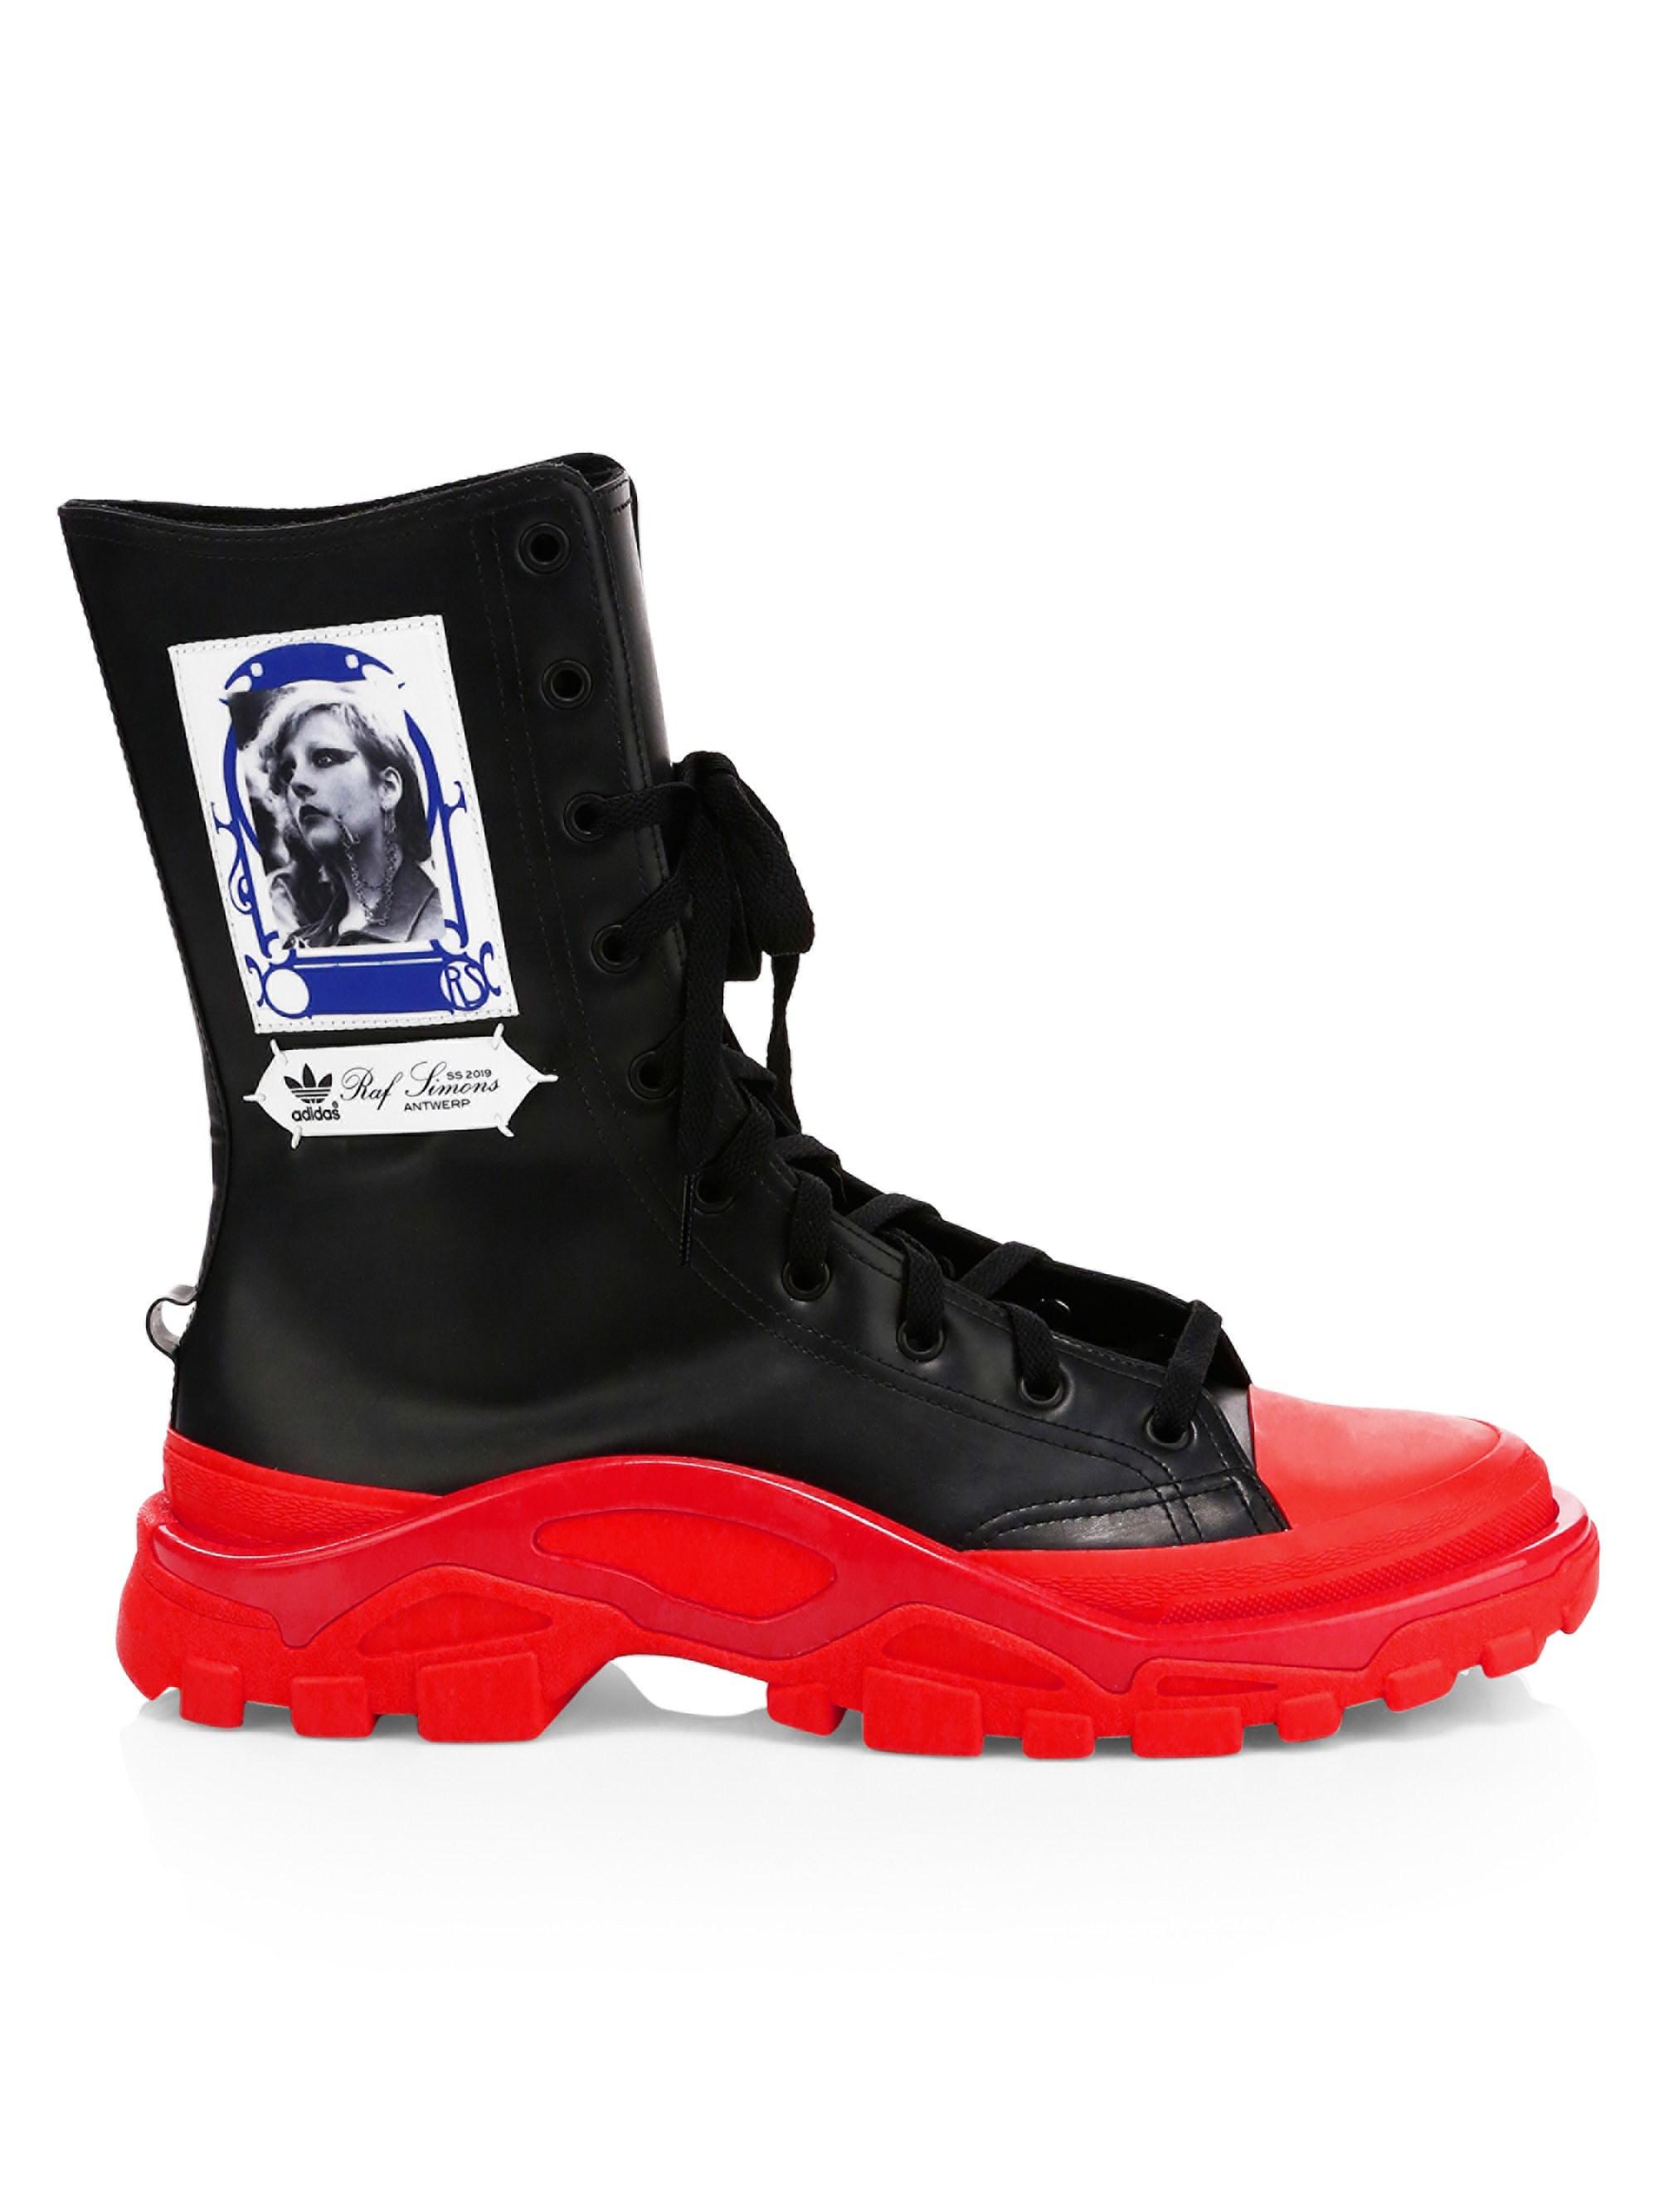 adidas By Raf Simons Detroit High Boots in Black for Men - Lyst